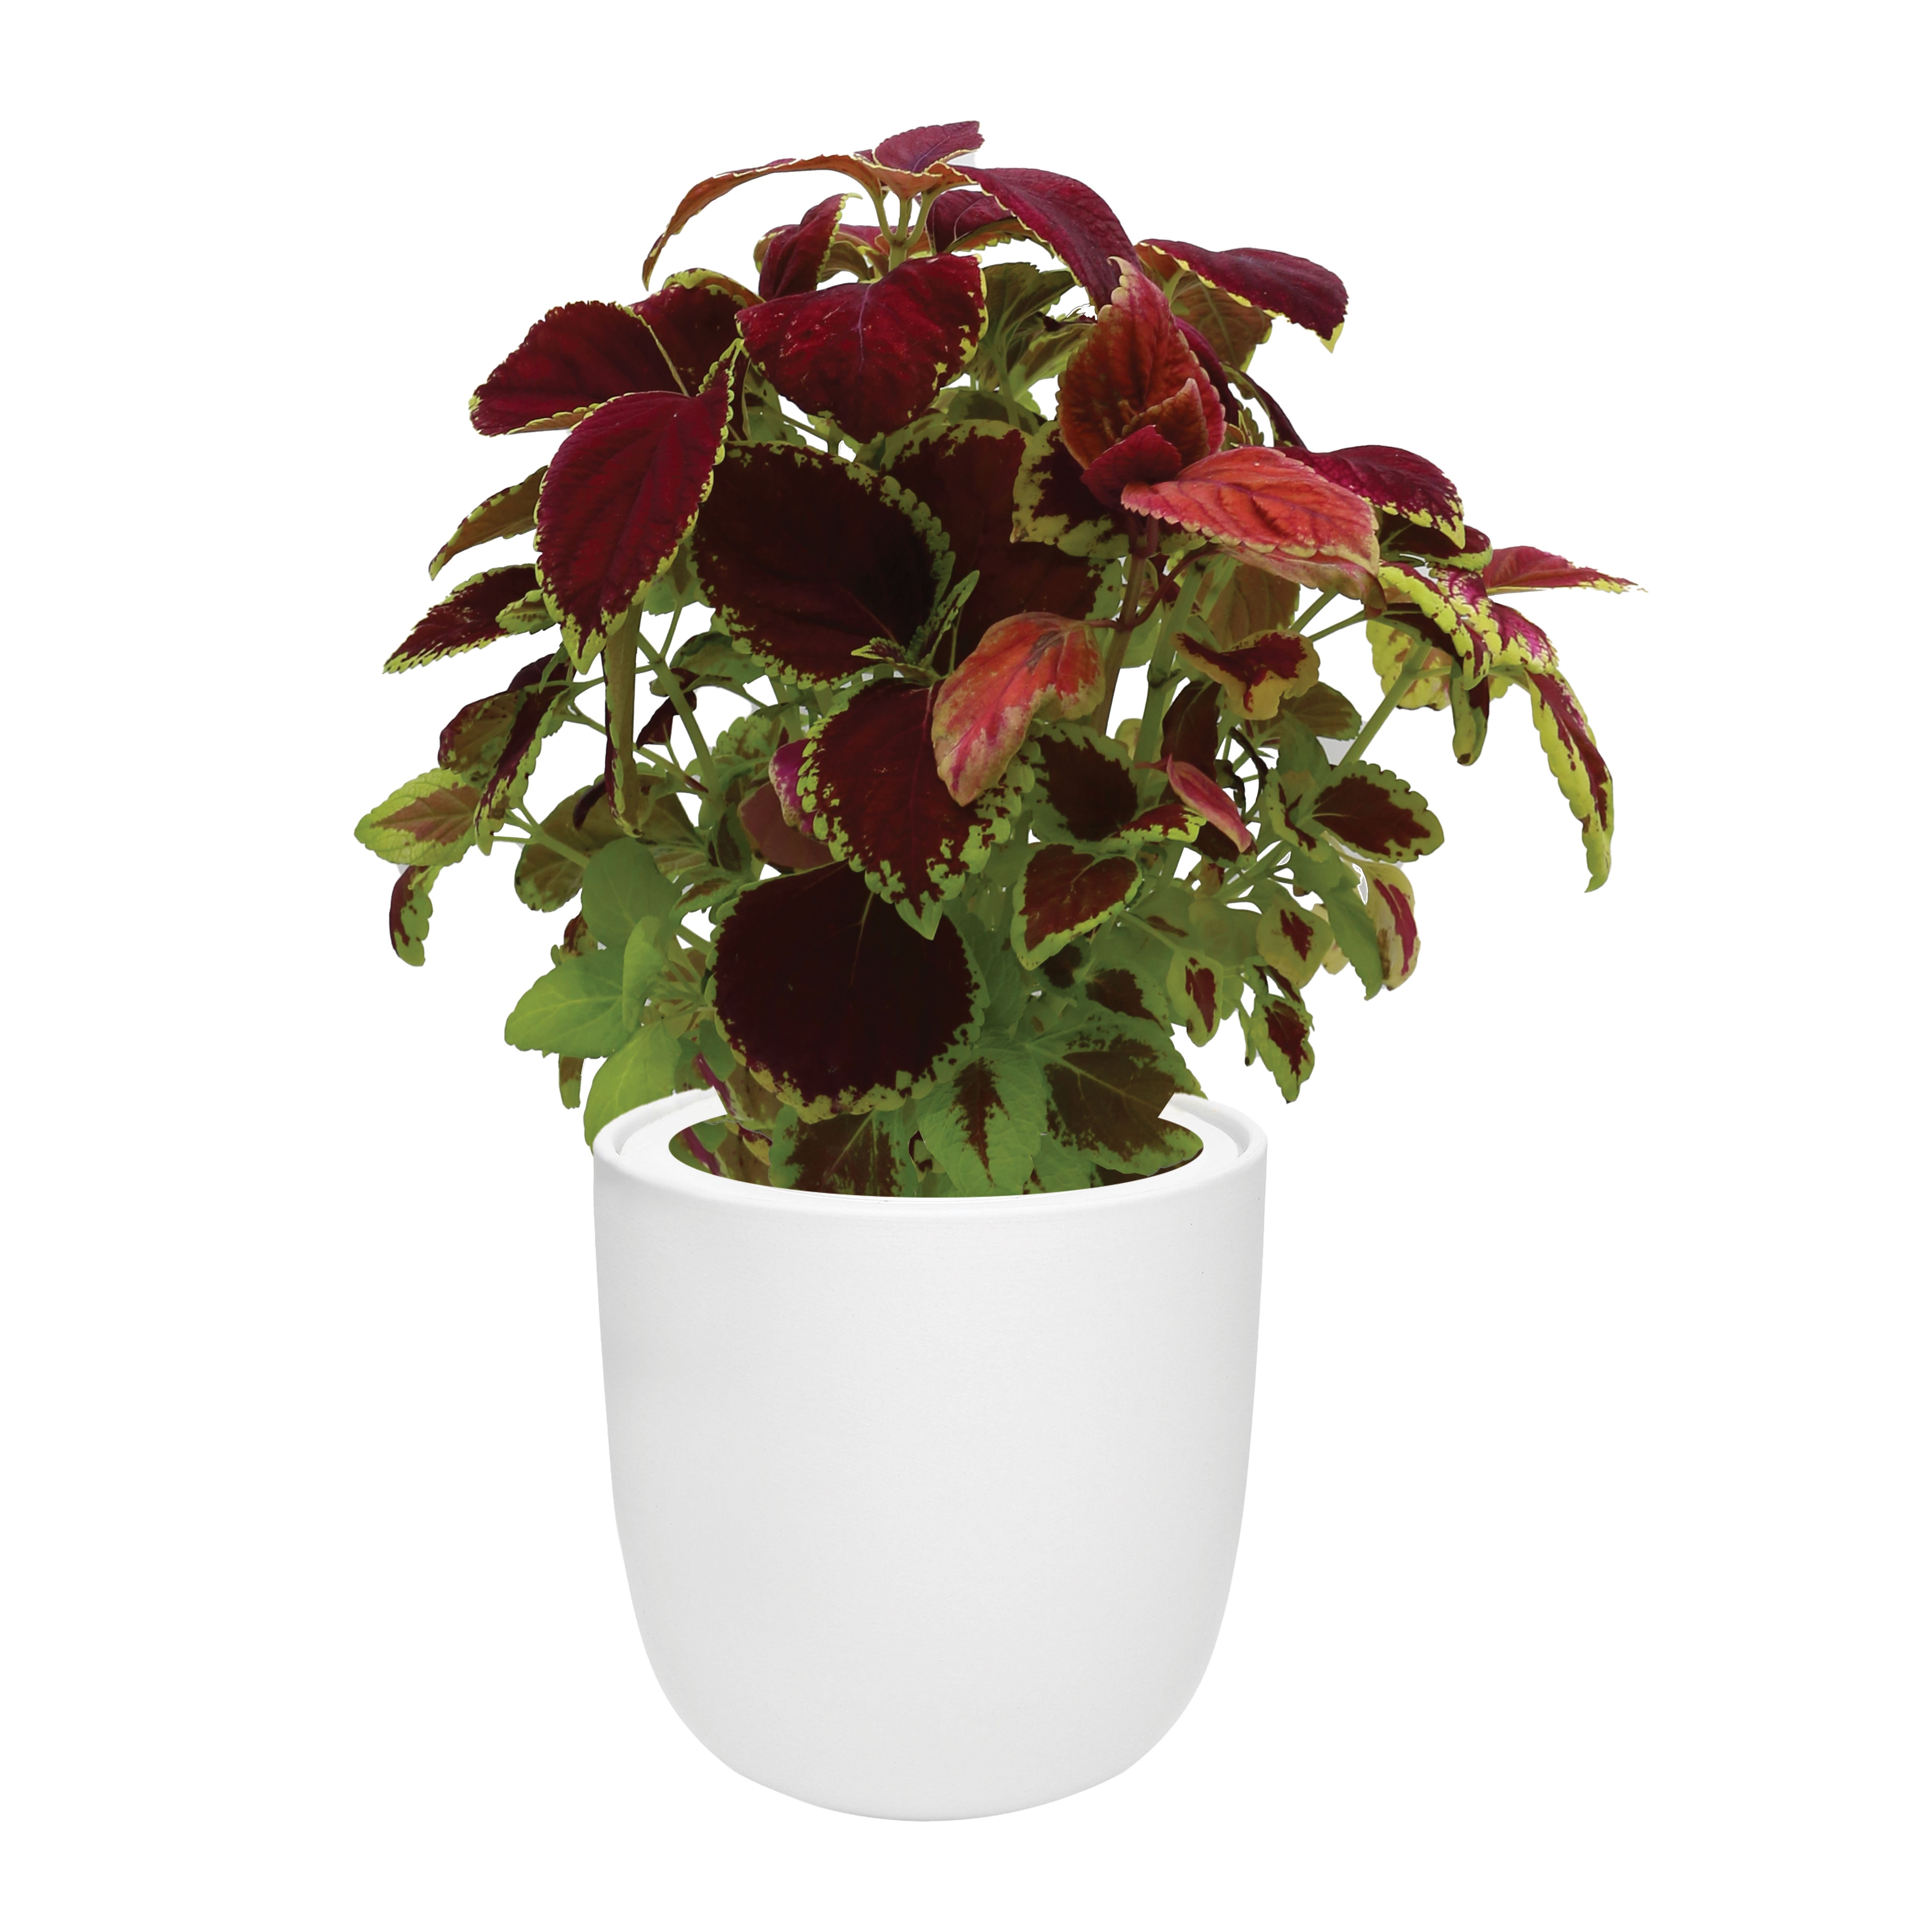 Hydroponic Growing Kit with White Ceramic Pot and Seeds (Coleus-White)